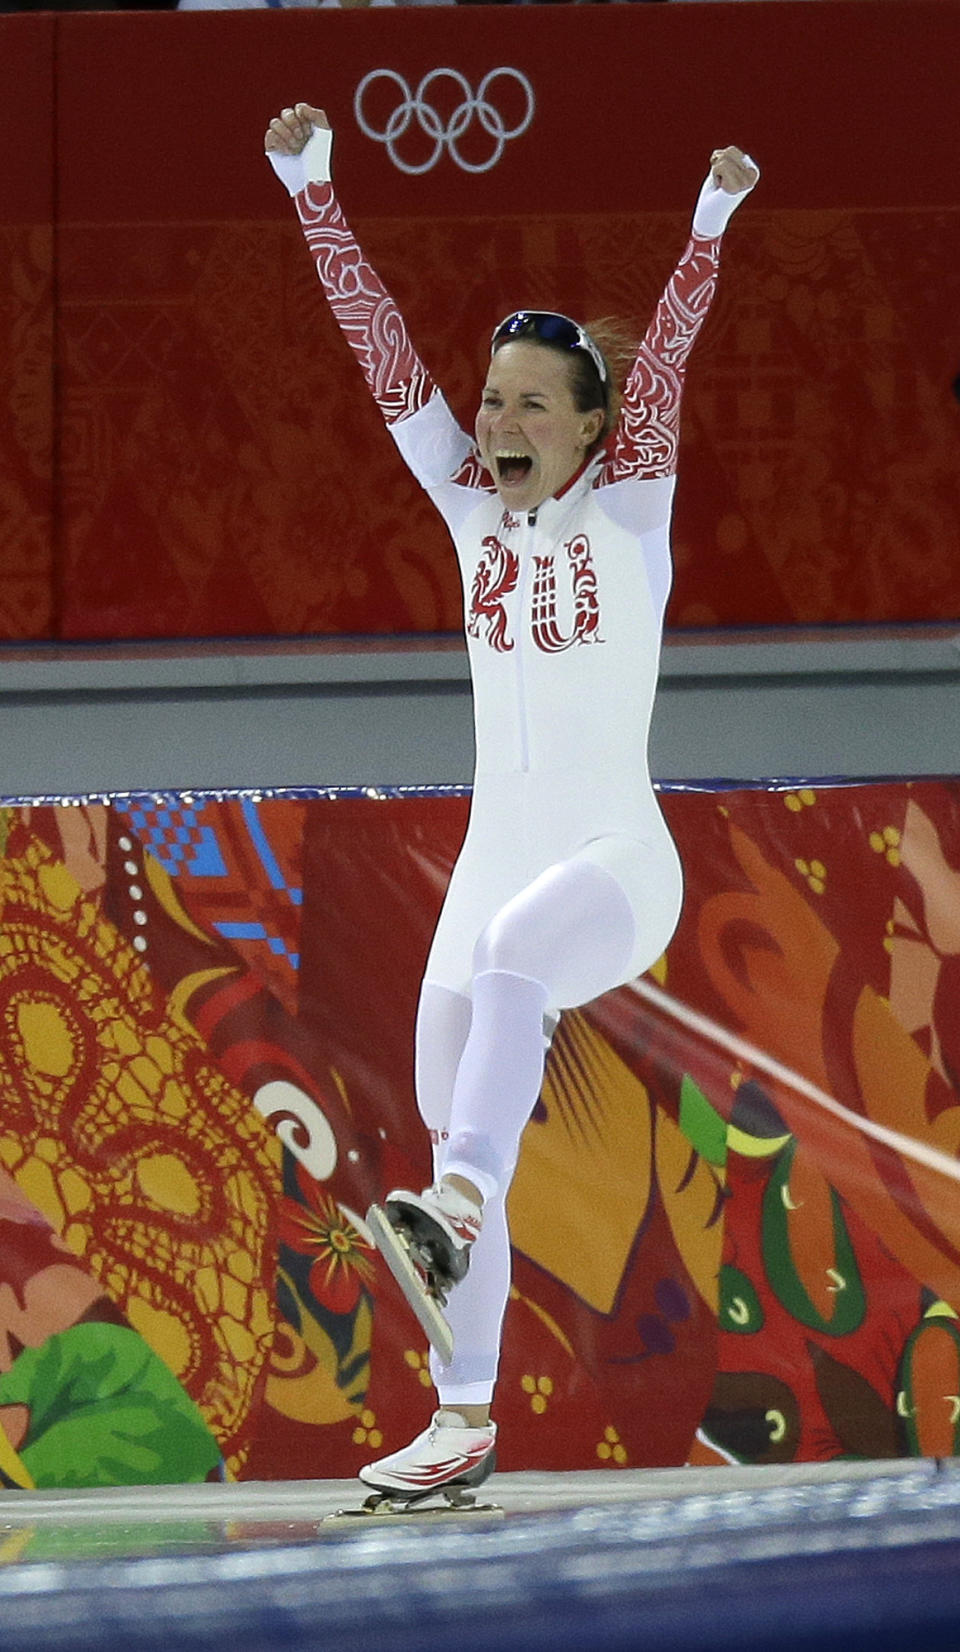 Russia's Olga Graf celebrates after finishing her race during the women's 3,000-meter speedskating competition at the 2014 Winter Olympics, Sunday, Feb. 9, 2014, in Sochi, Russia. (AP Photo/David J. Phillip )